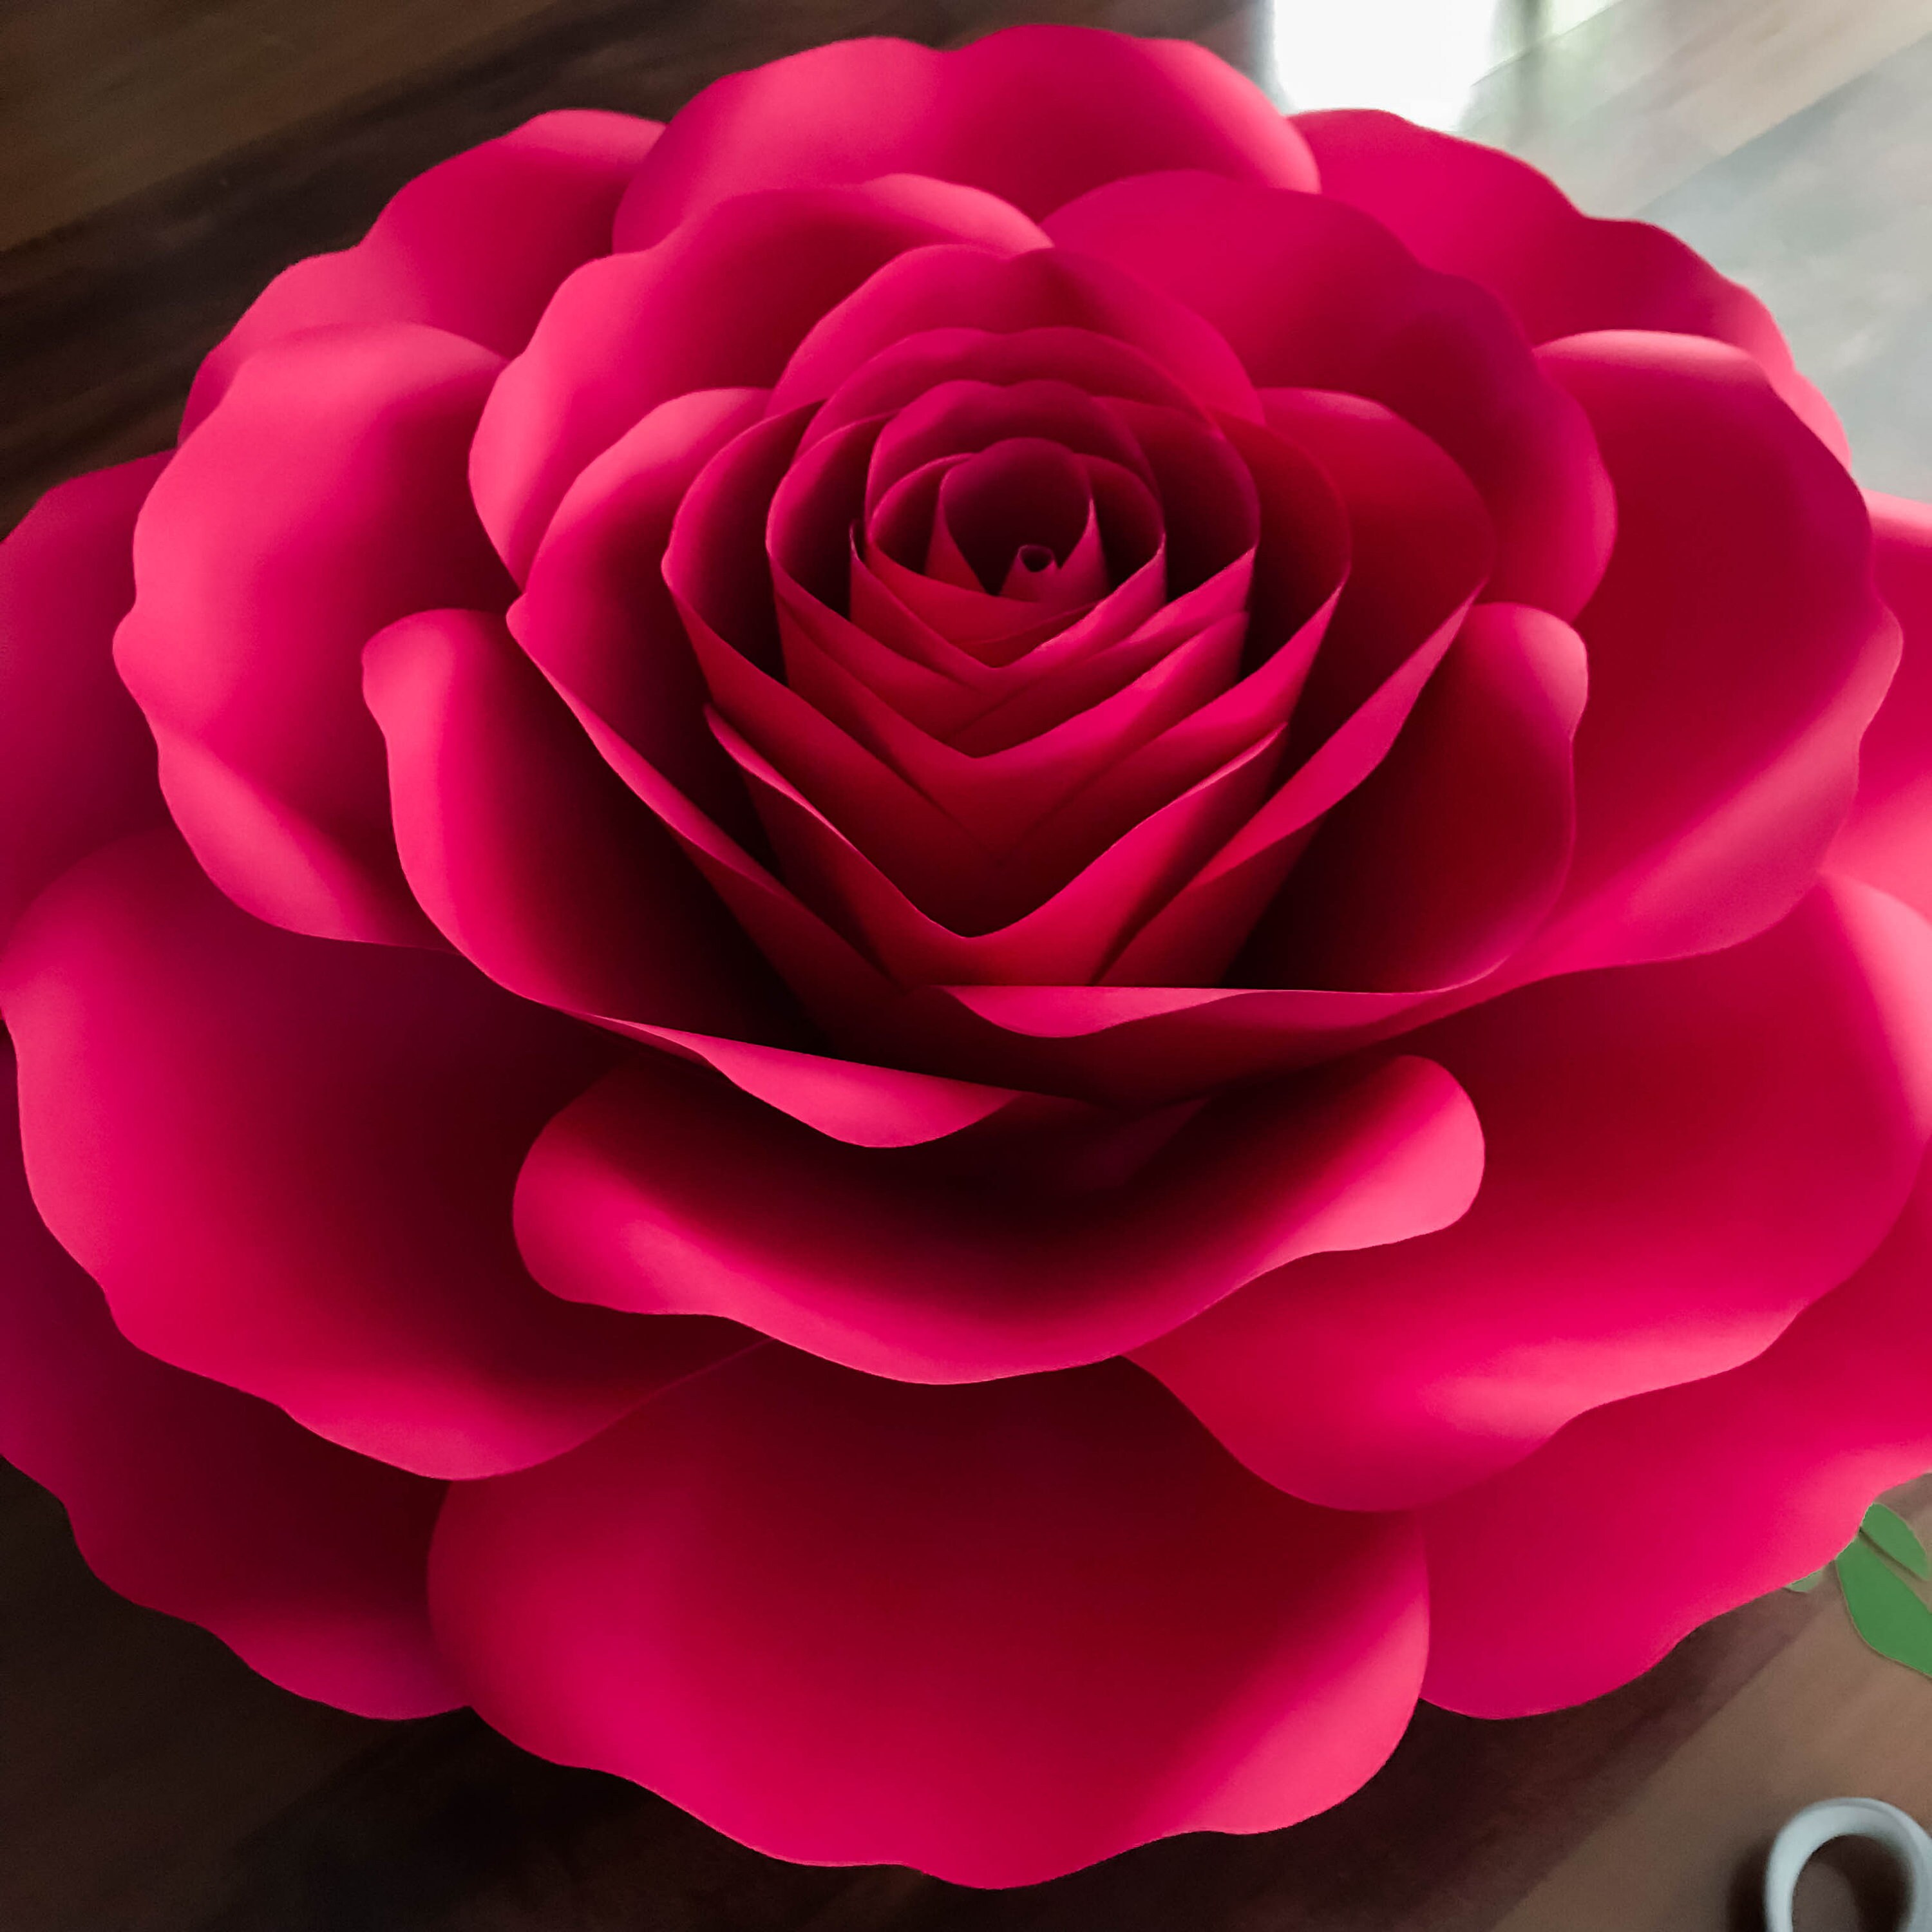 PDF A4 XL Rose Paper Flower Templates W Rose Bub Center Included 